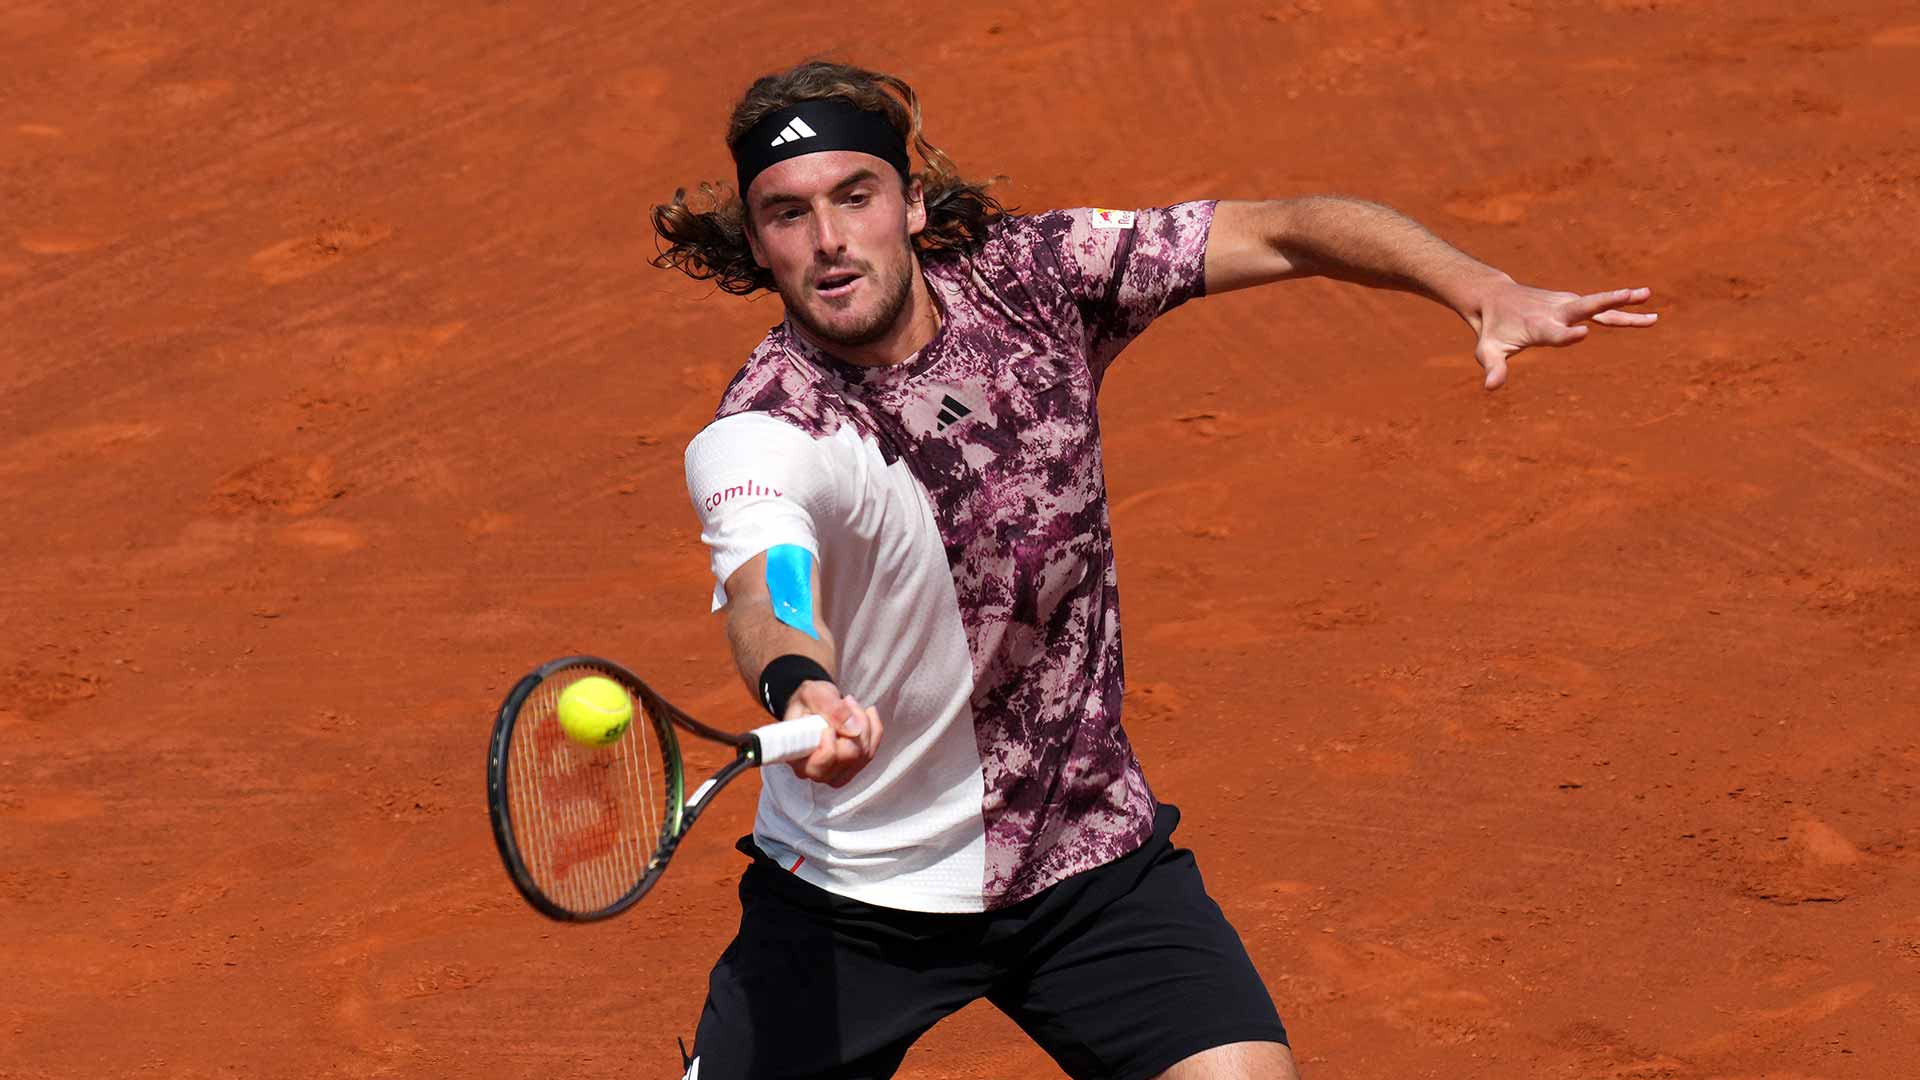 Stefanos Tsitsipas is chasing his third ATP Masters 1000 crown in Madrid.